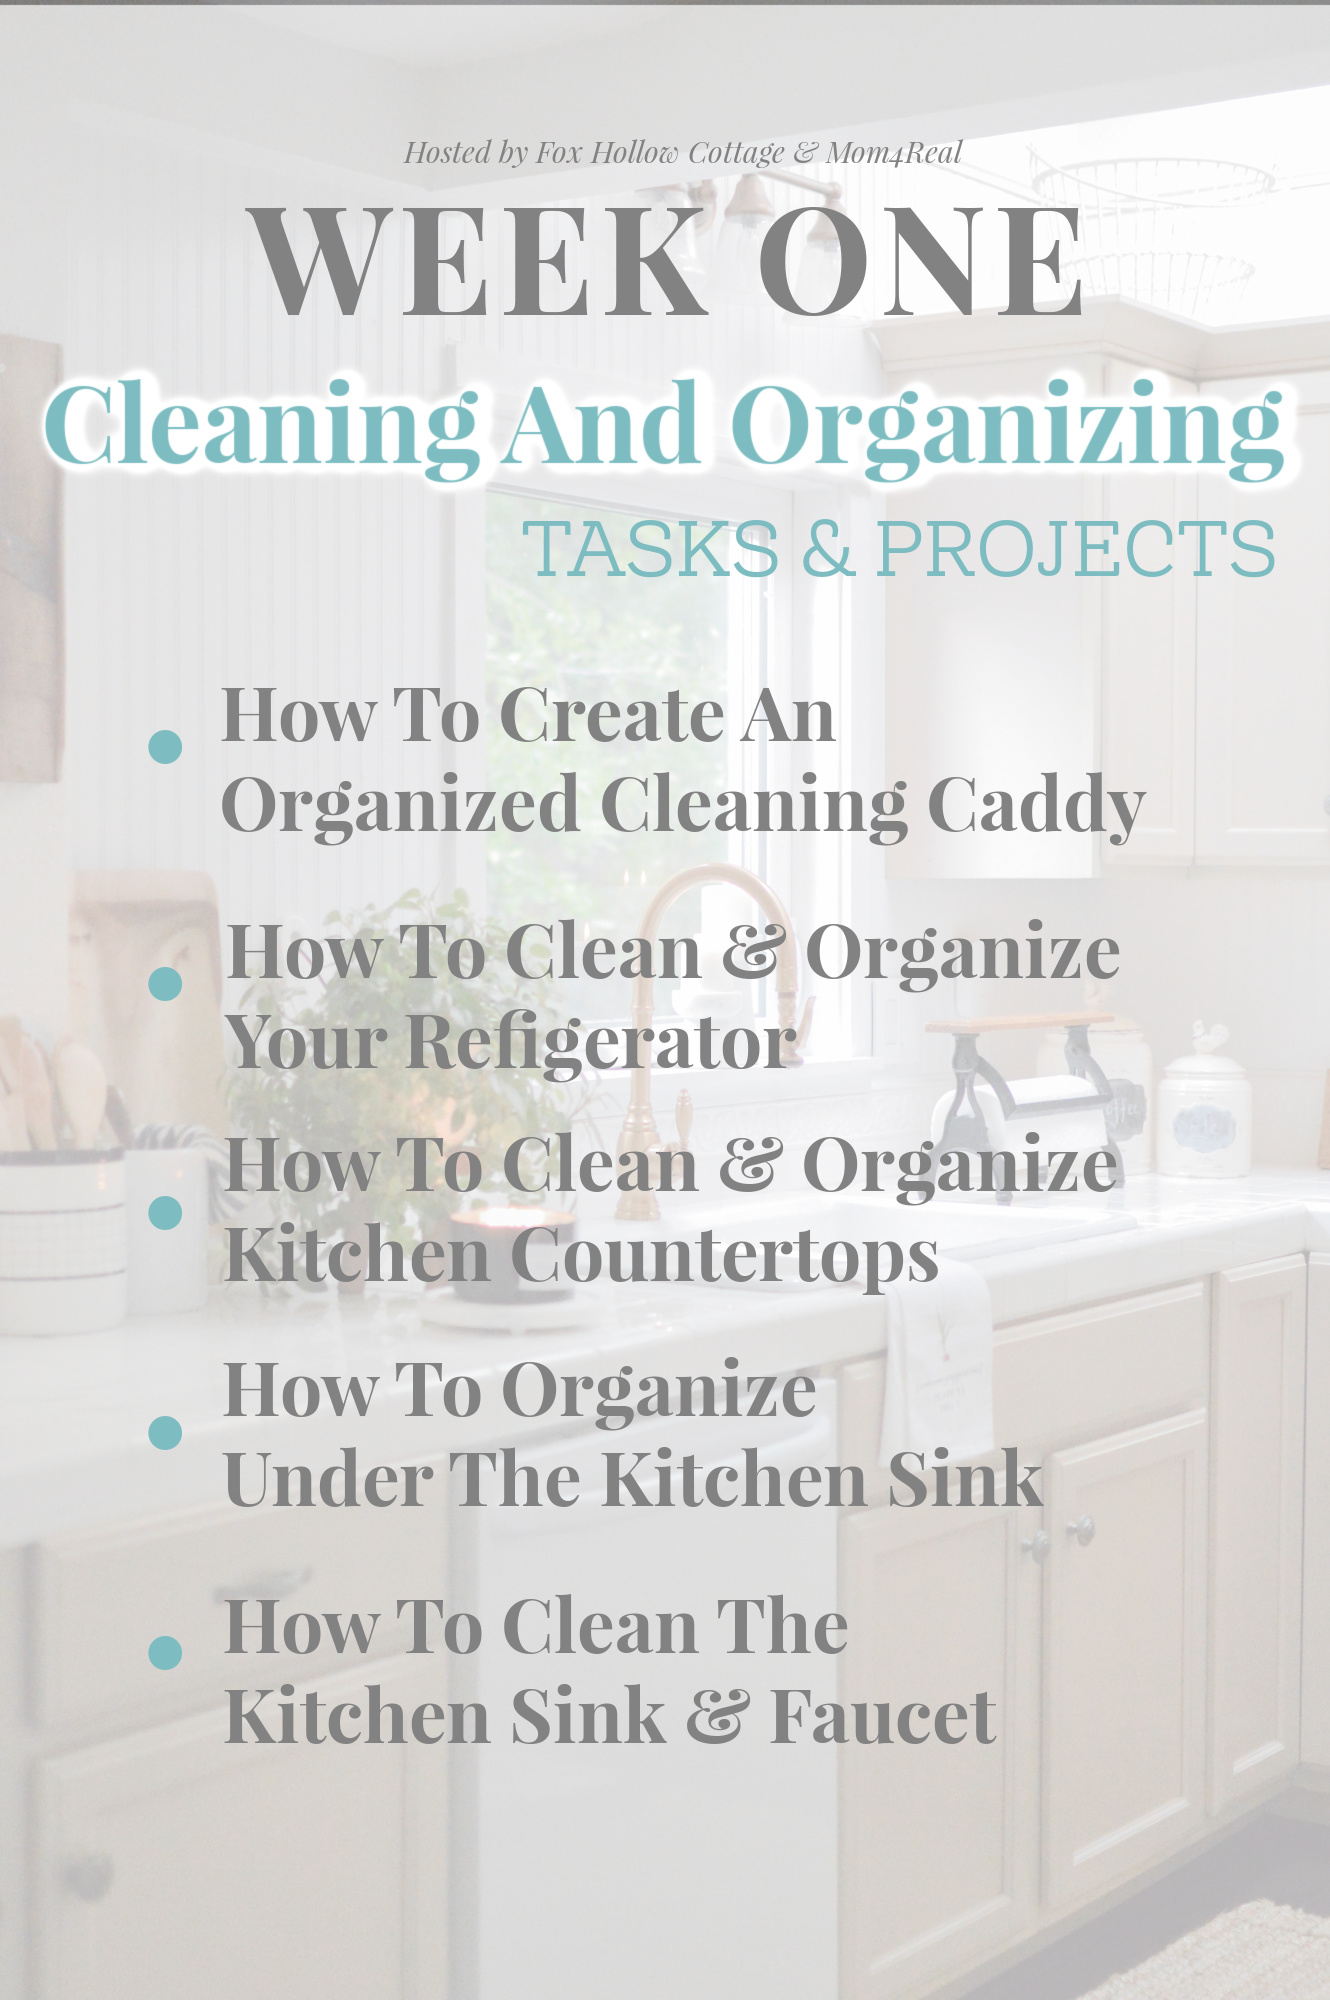 https://foxhollowcottage.com/wp-content/uploads/2021/01/Cleaning-and-Organizing-Challenge-week-one-tasks-projects-at-www.foxhollowcottage.com-cleaningandorganizing.jpg